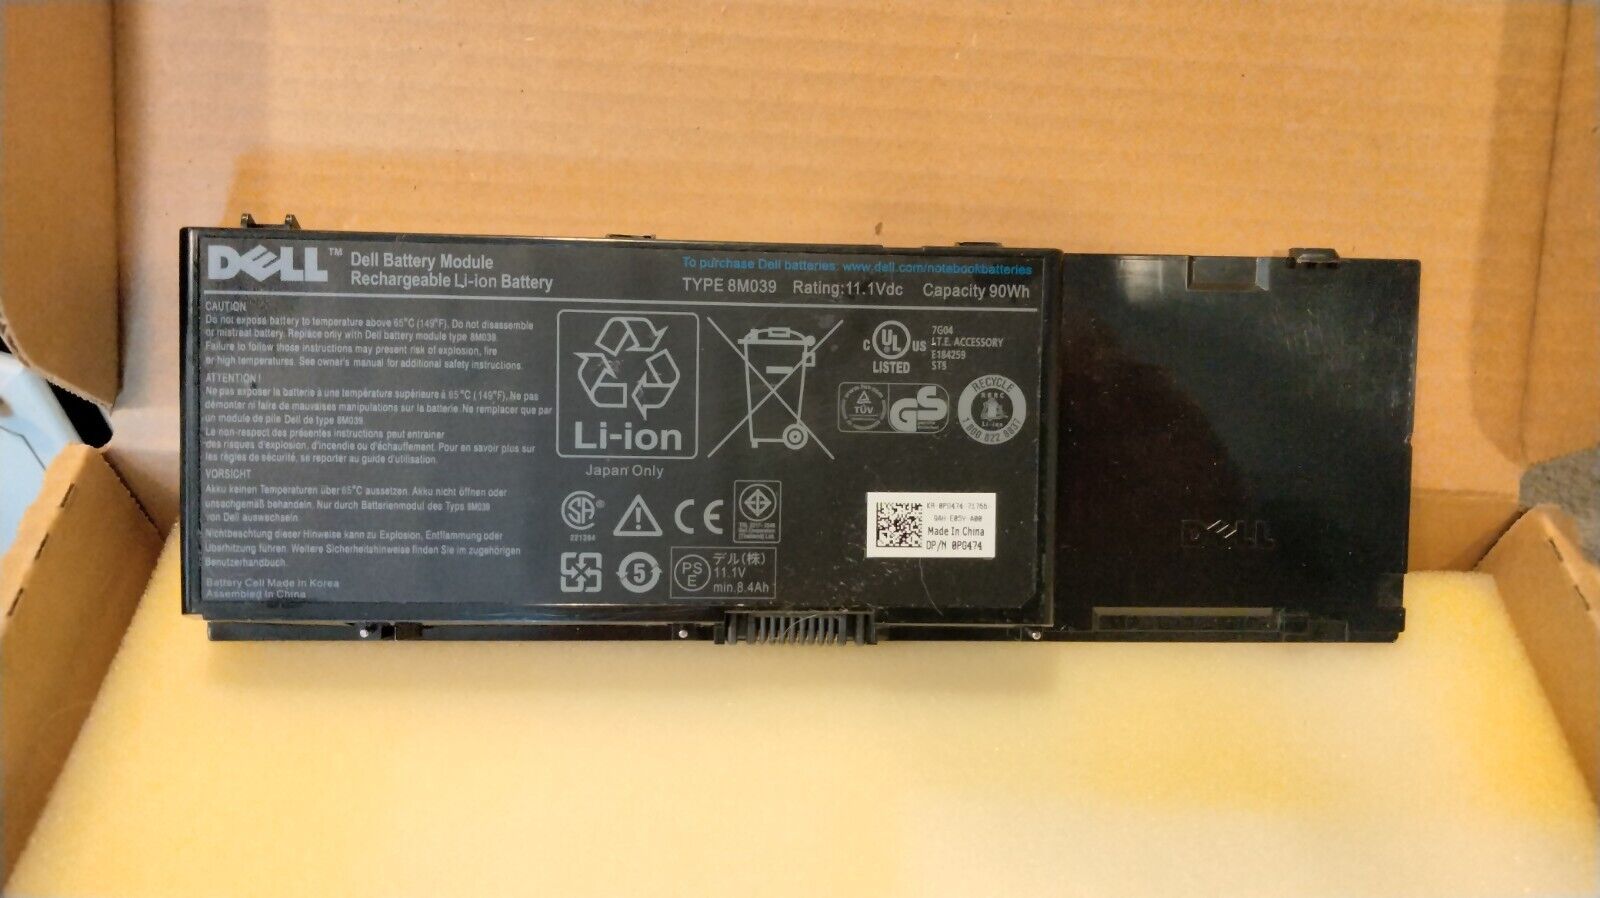 New 90Wh OEM Battery for Dell Precision M2400 M4400 M6400 M6500 8M039 C565C